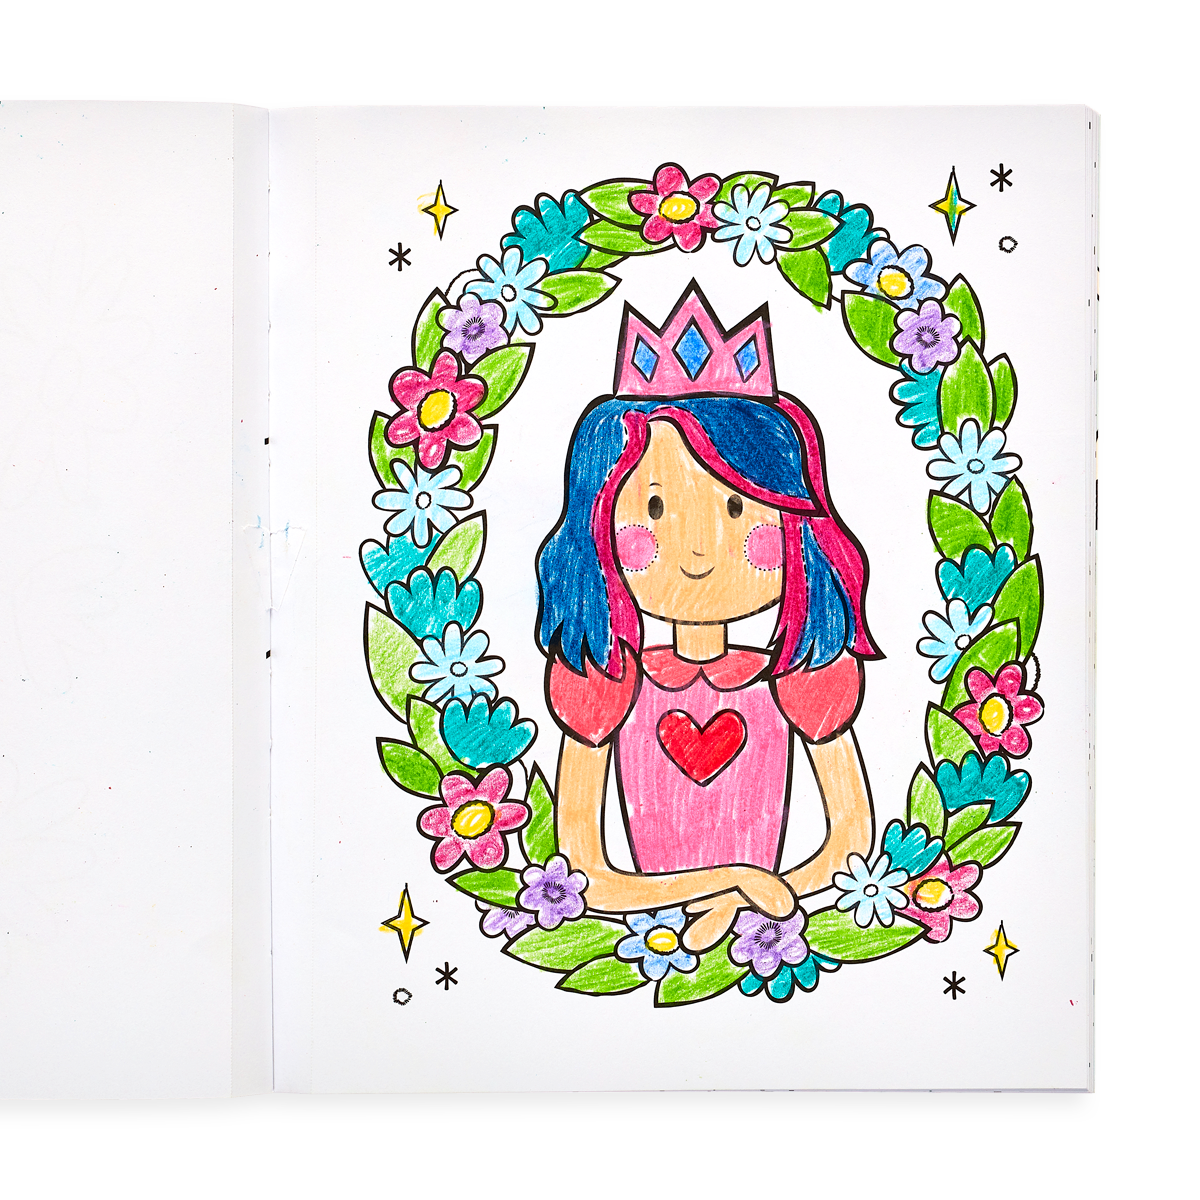 Drawing in the Princesses and Fairies Coloring Book